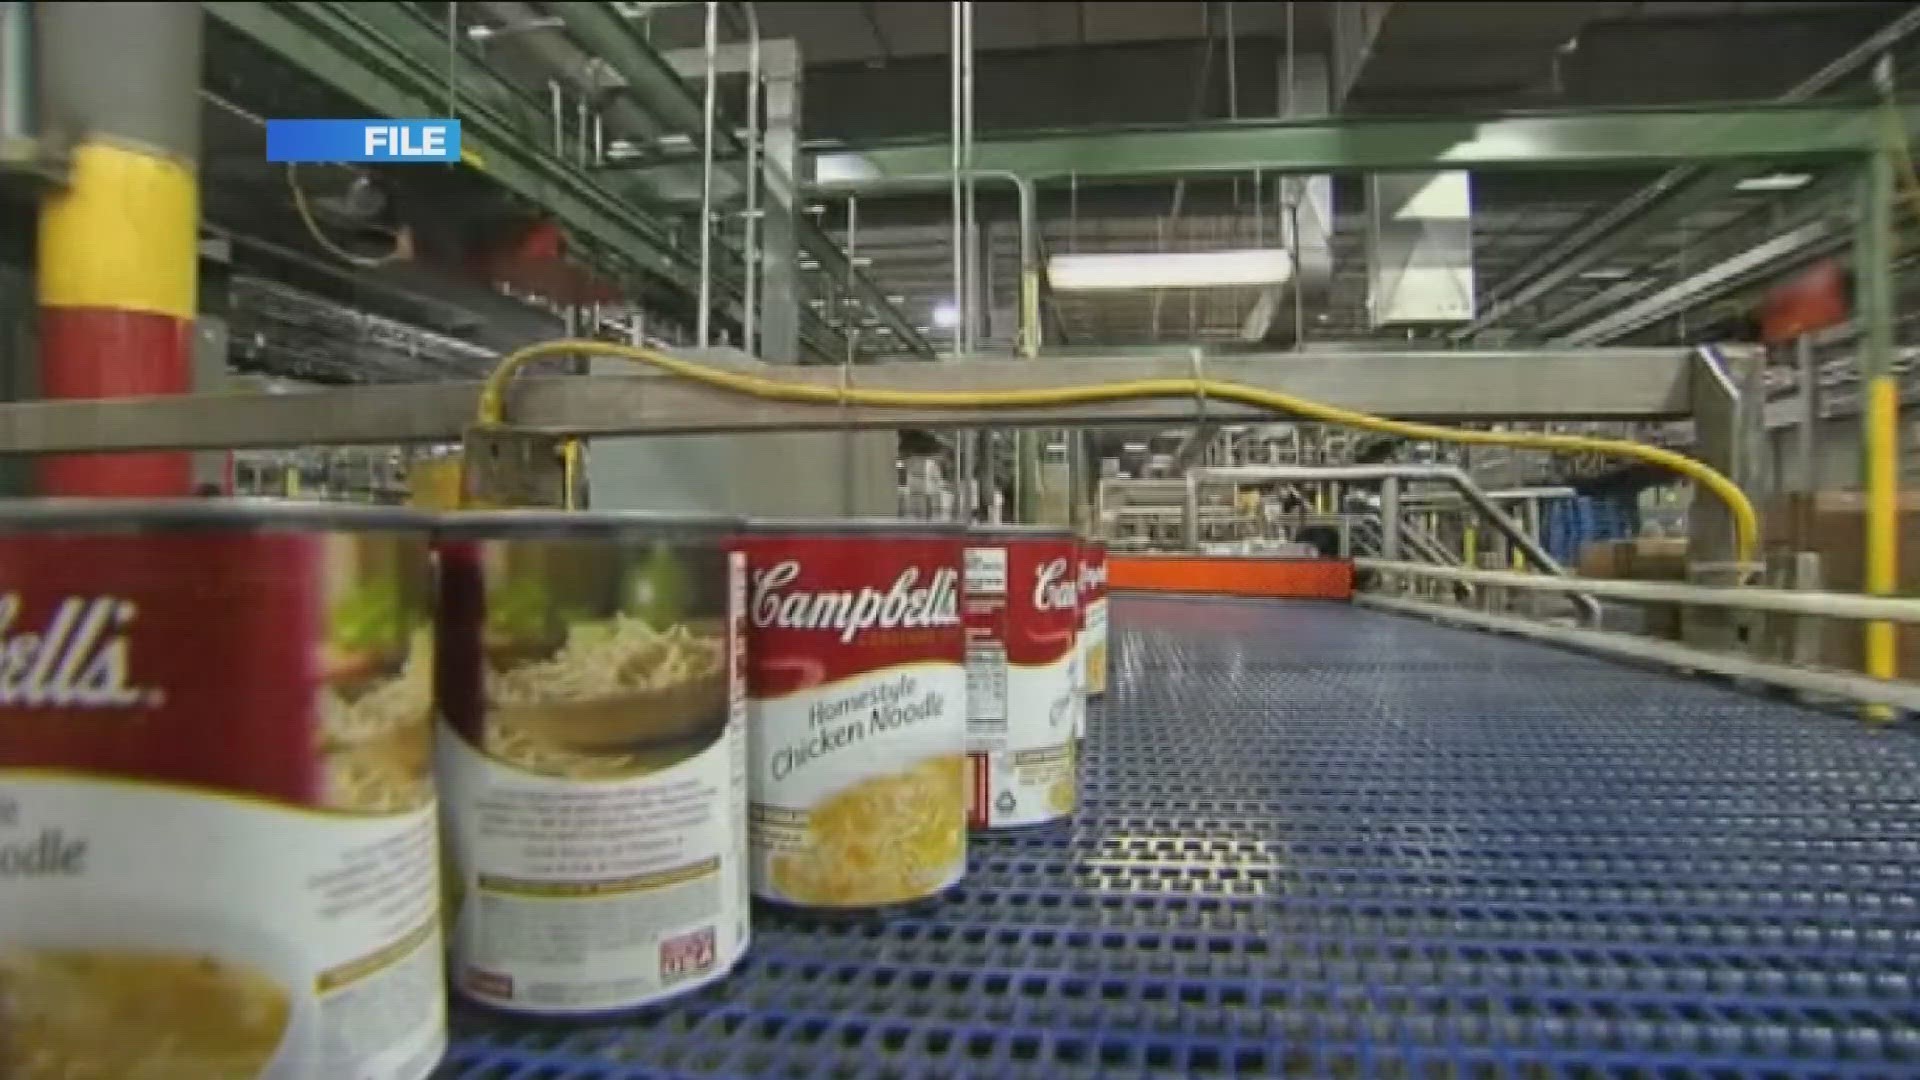 A Campbell Soup spokesperson said "our supply chain and IT teams are working to restore the systems as quickly as possible."